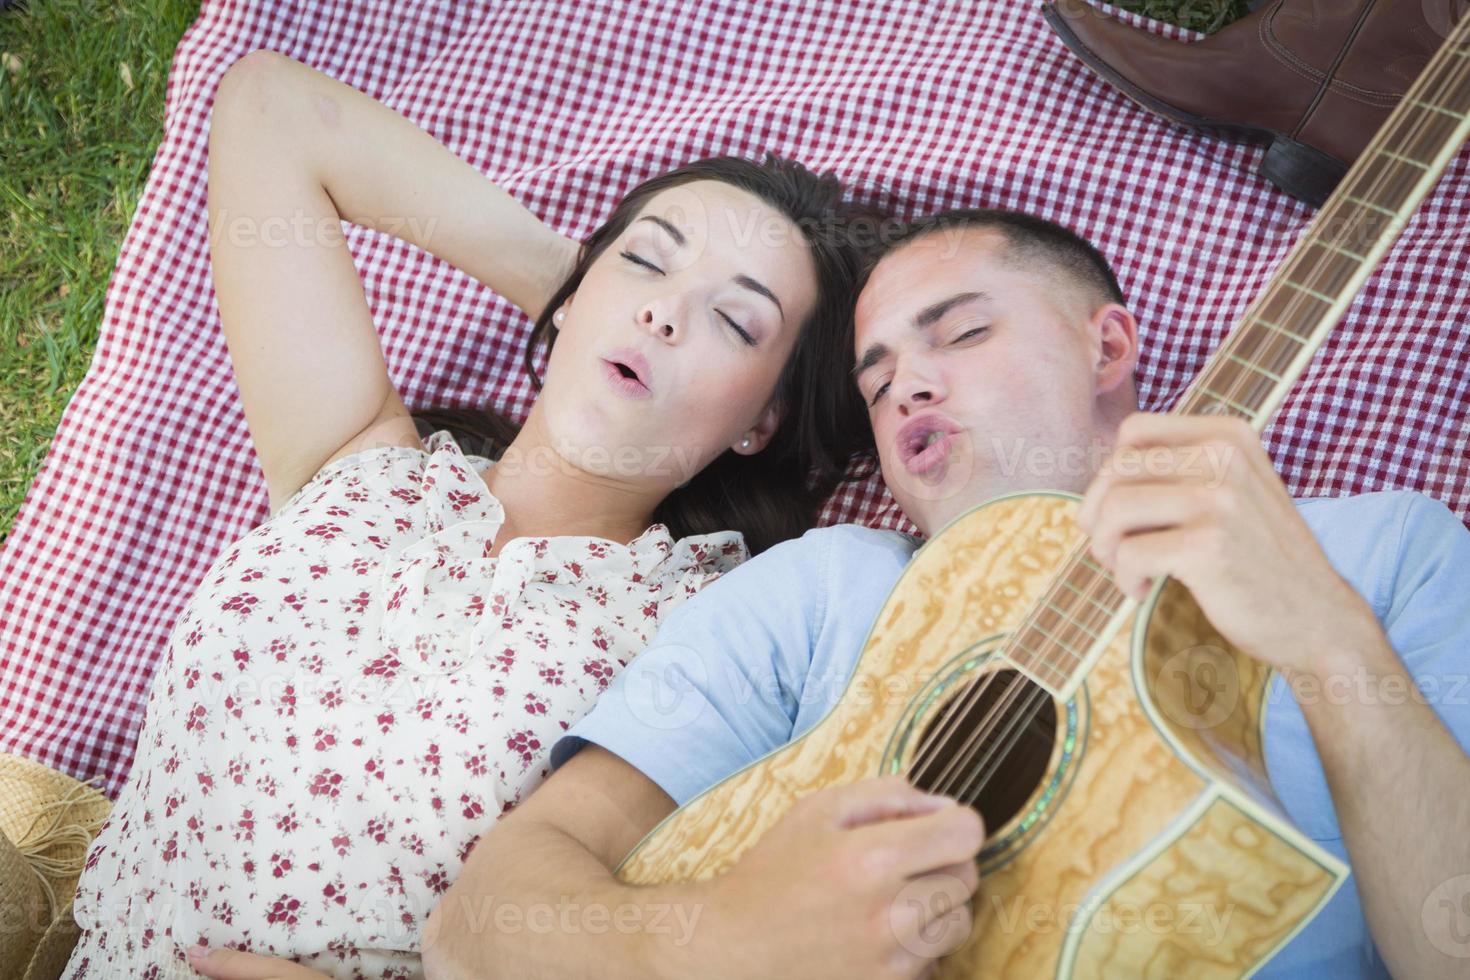 Mixed Race Couple at the Park Playing Guitar and Singing photo